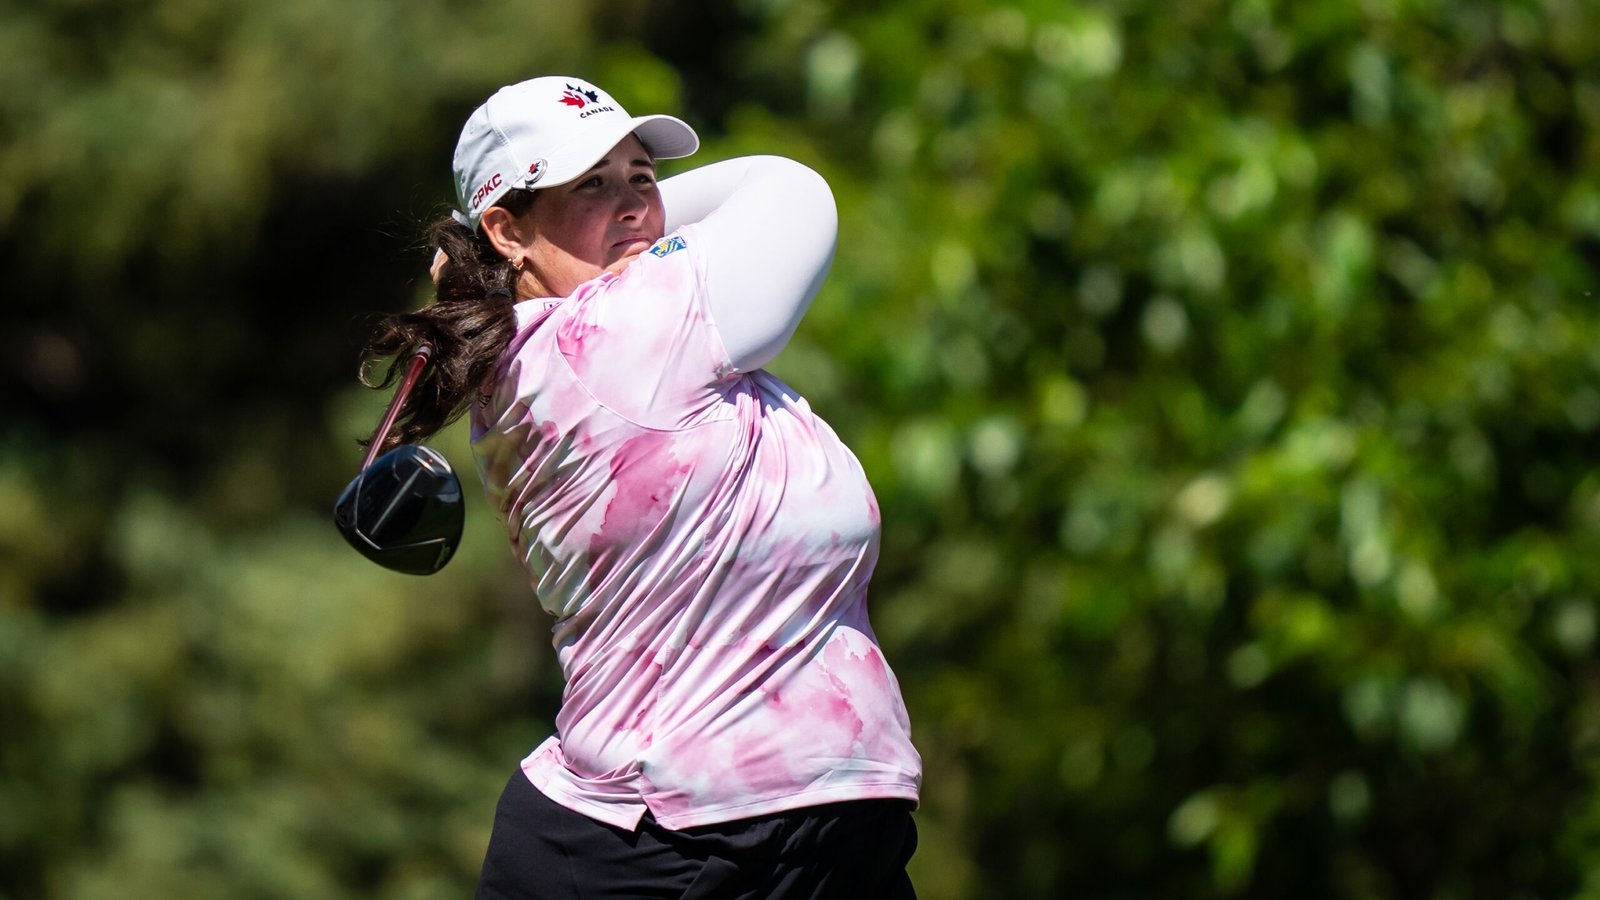 Canada’s Lauren Zaretsky wins first NCAA golf title and is primed for more success